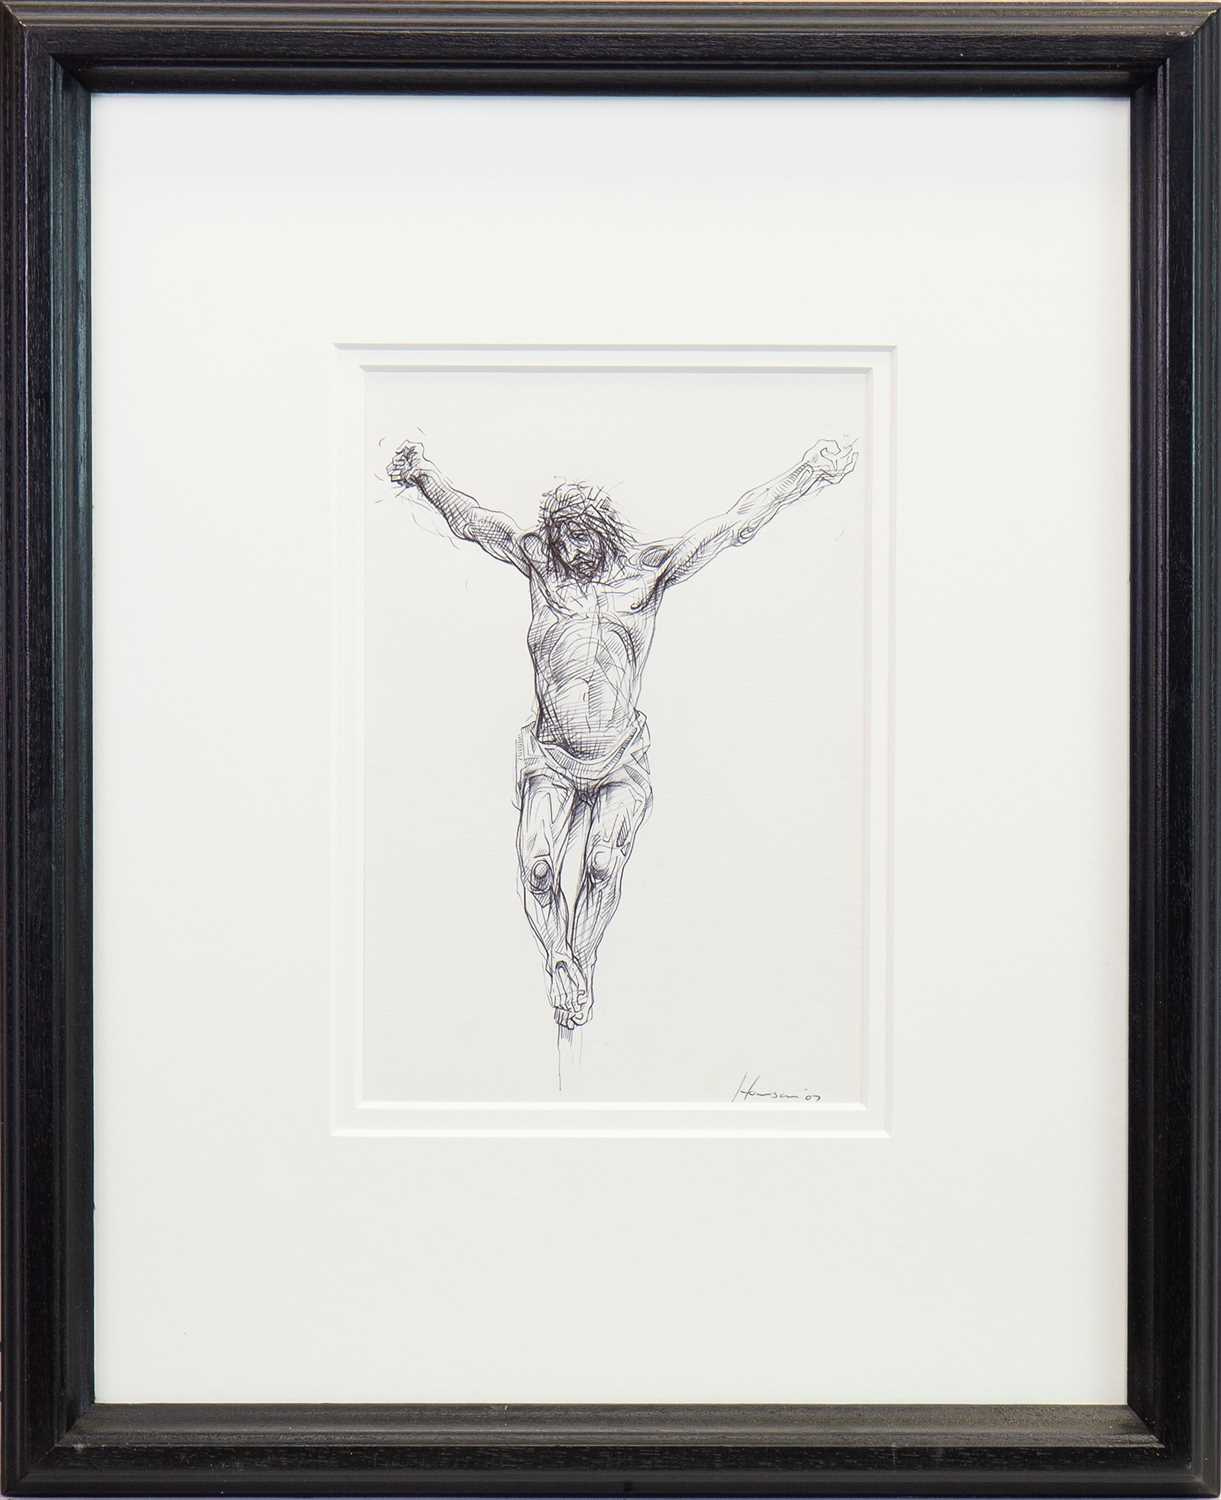 Lot 710 - CRUCIFIXION 2007, BY PETER HOWSON